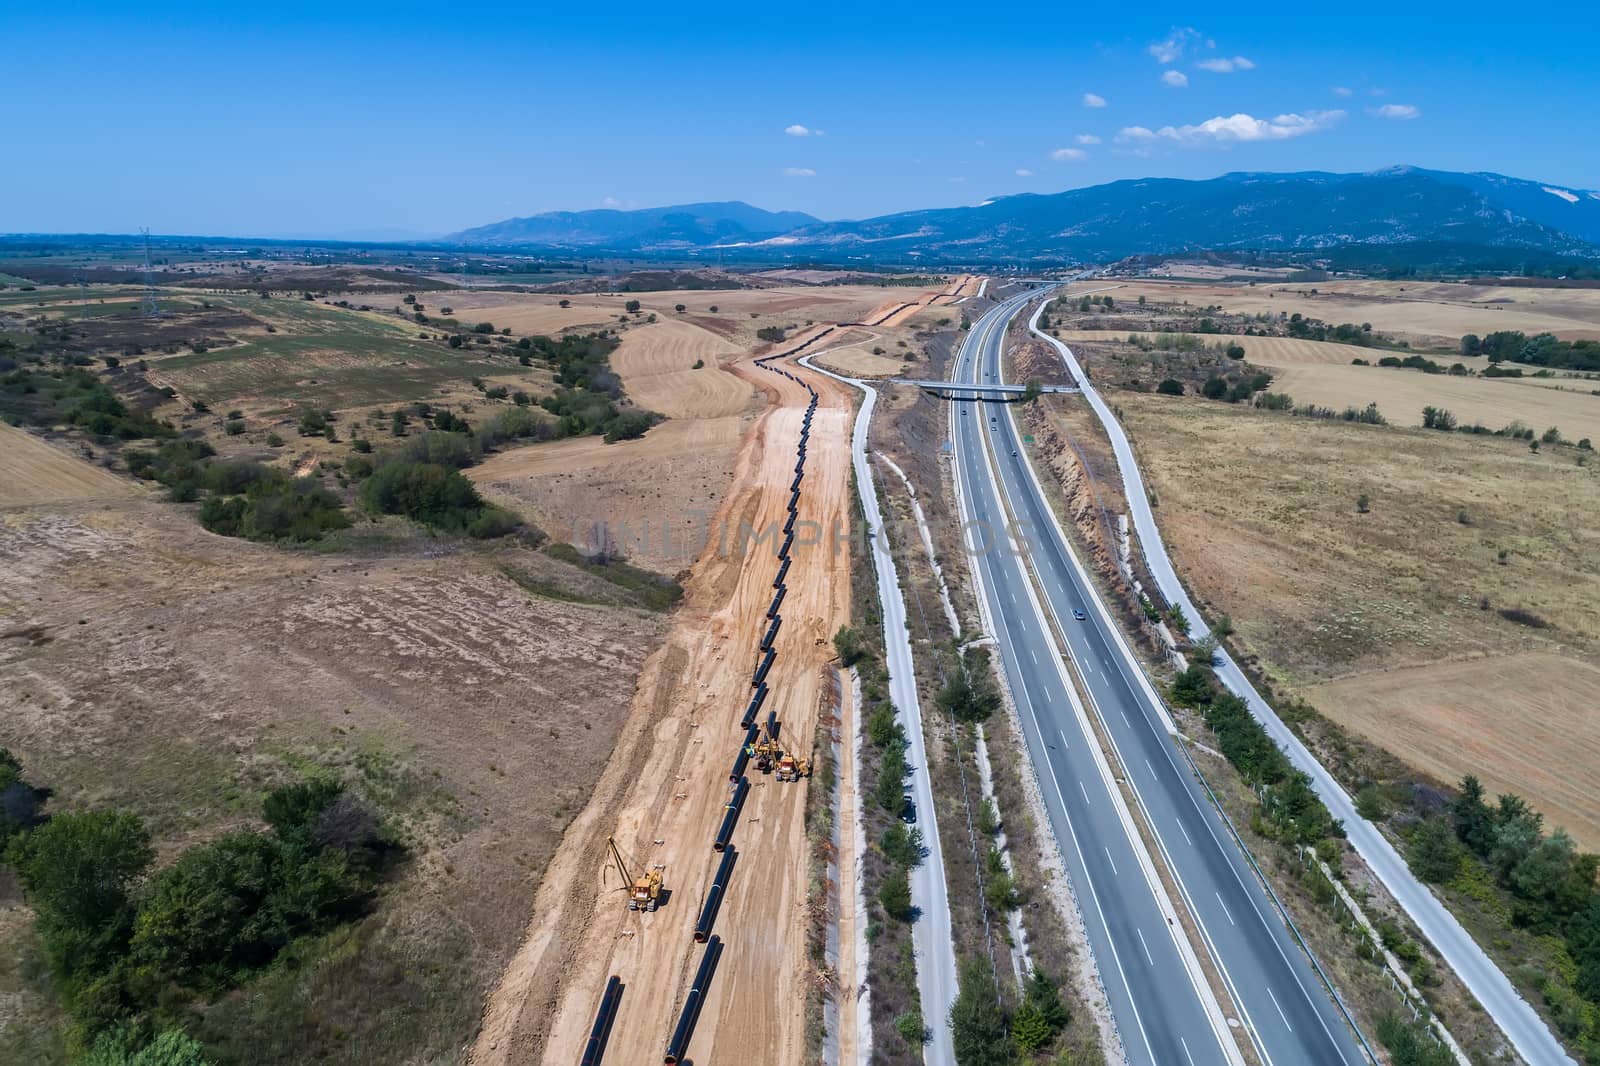 aerial view of construction of gas pipeline Trans Adriatic Pipeline - TAP in north Greece. The pipeline starts from the Caspian sea and reaches the coast of southern Italy